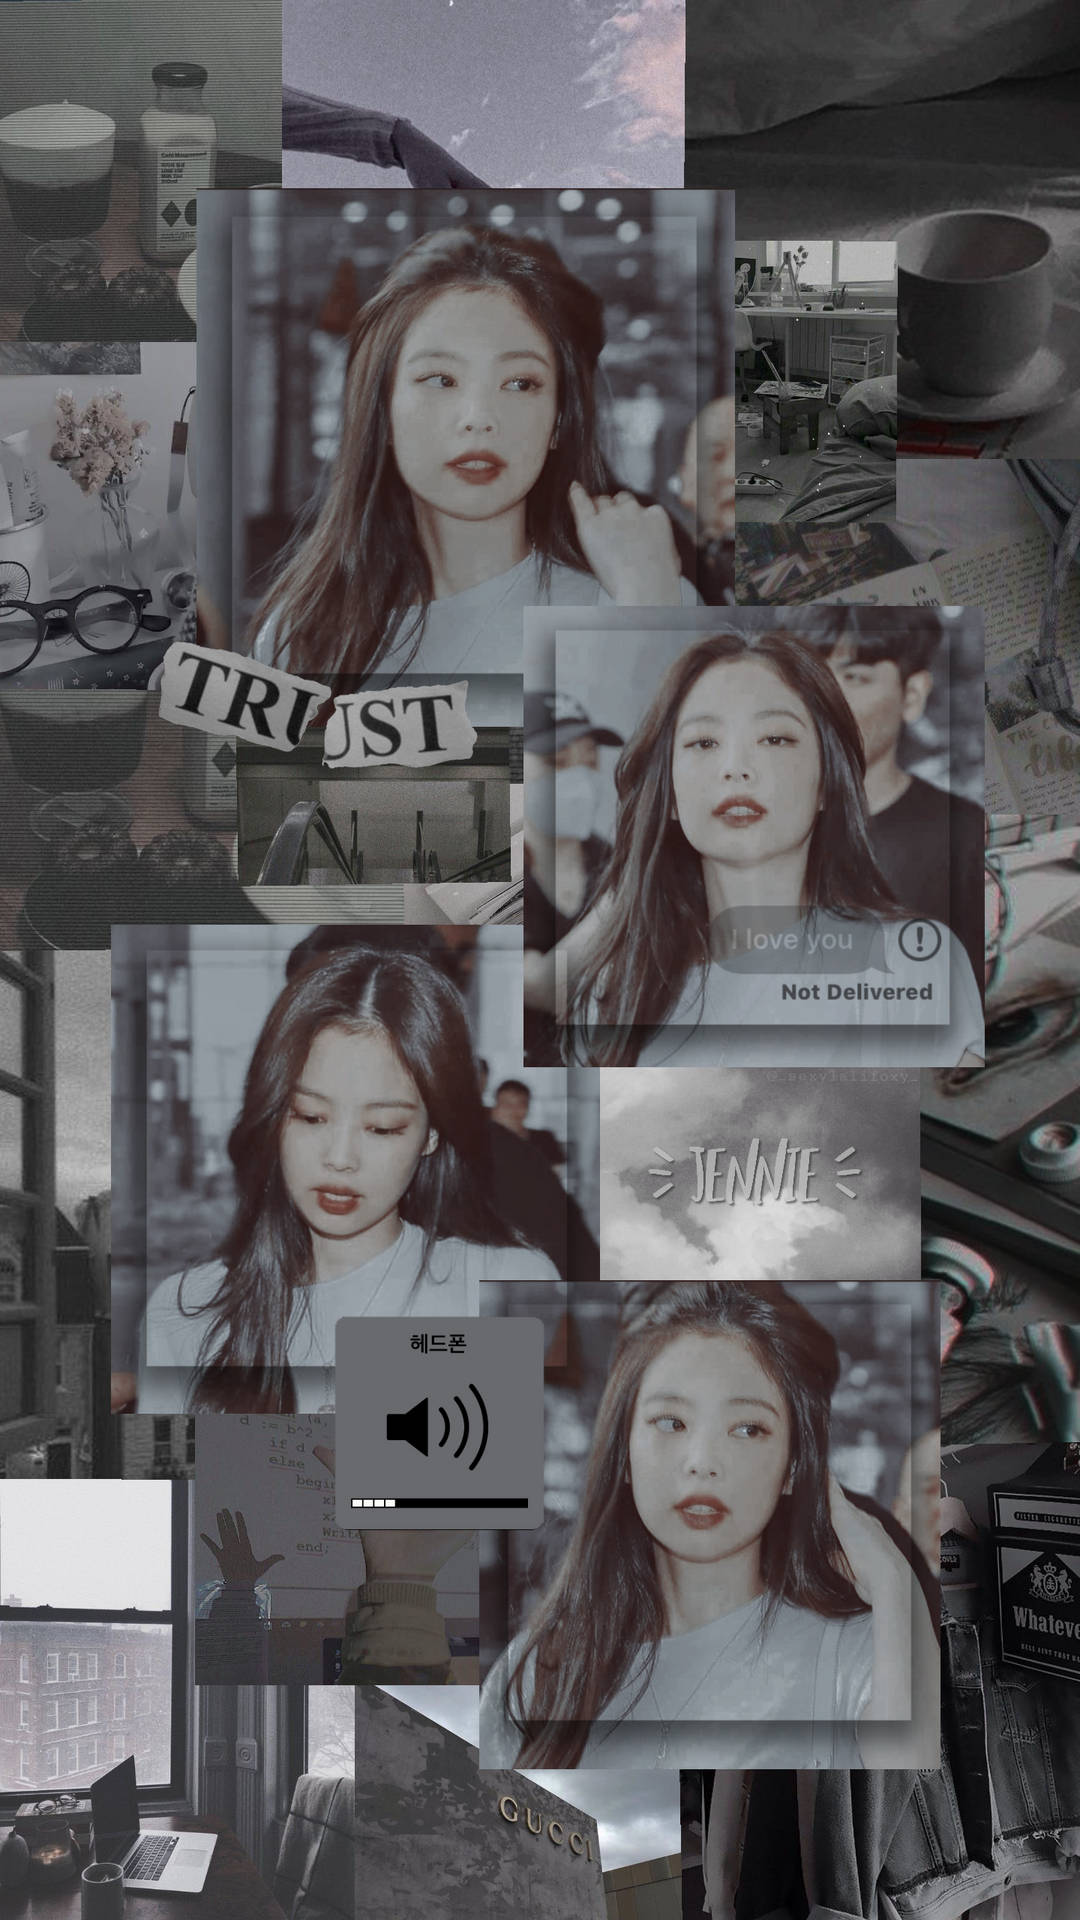 Blackpink aesthetic wallpaper, i love you, not delivered, trust, jennie, jisoo, lisa, rose, black and white, kpop, 2020, aesthetic, edit, photo, picture, background, wallpaper, collage - Jennie, BLACKPINK